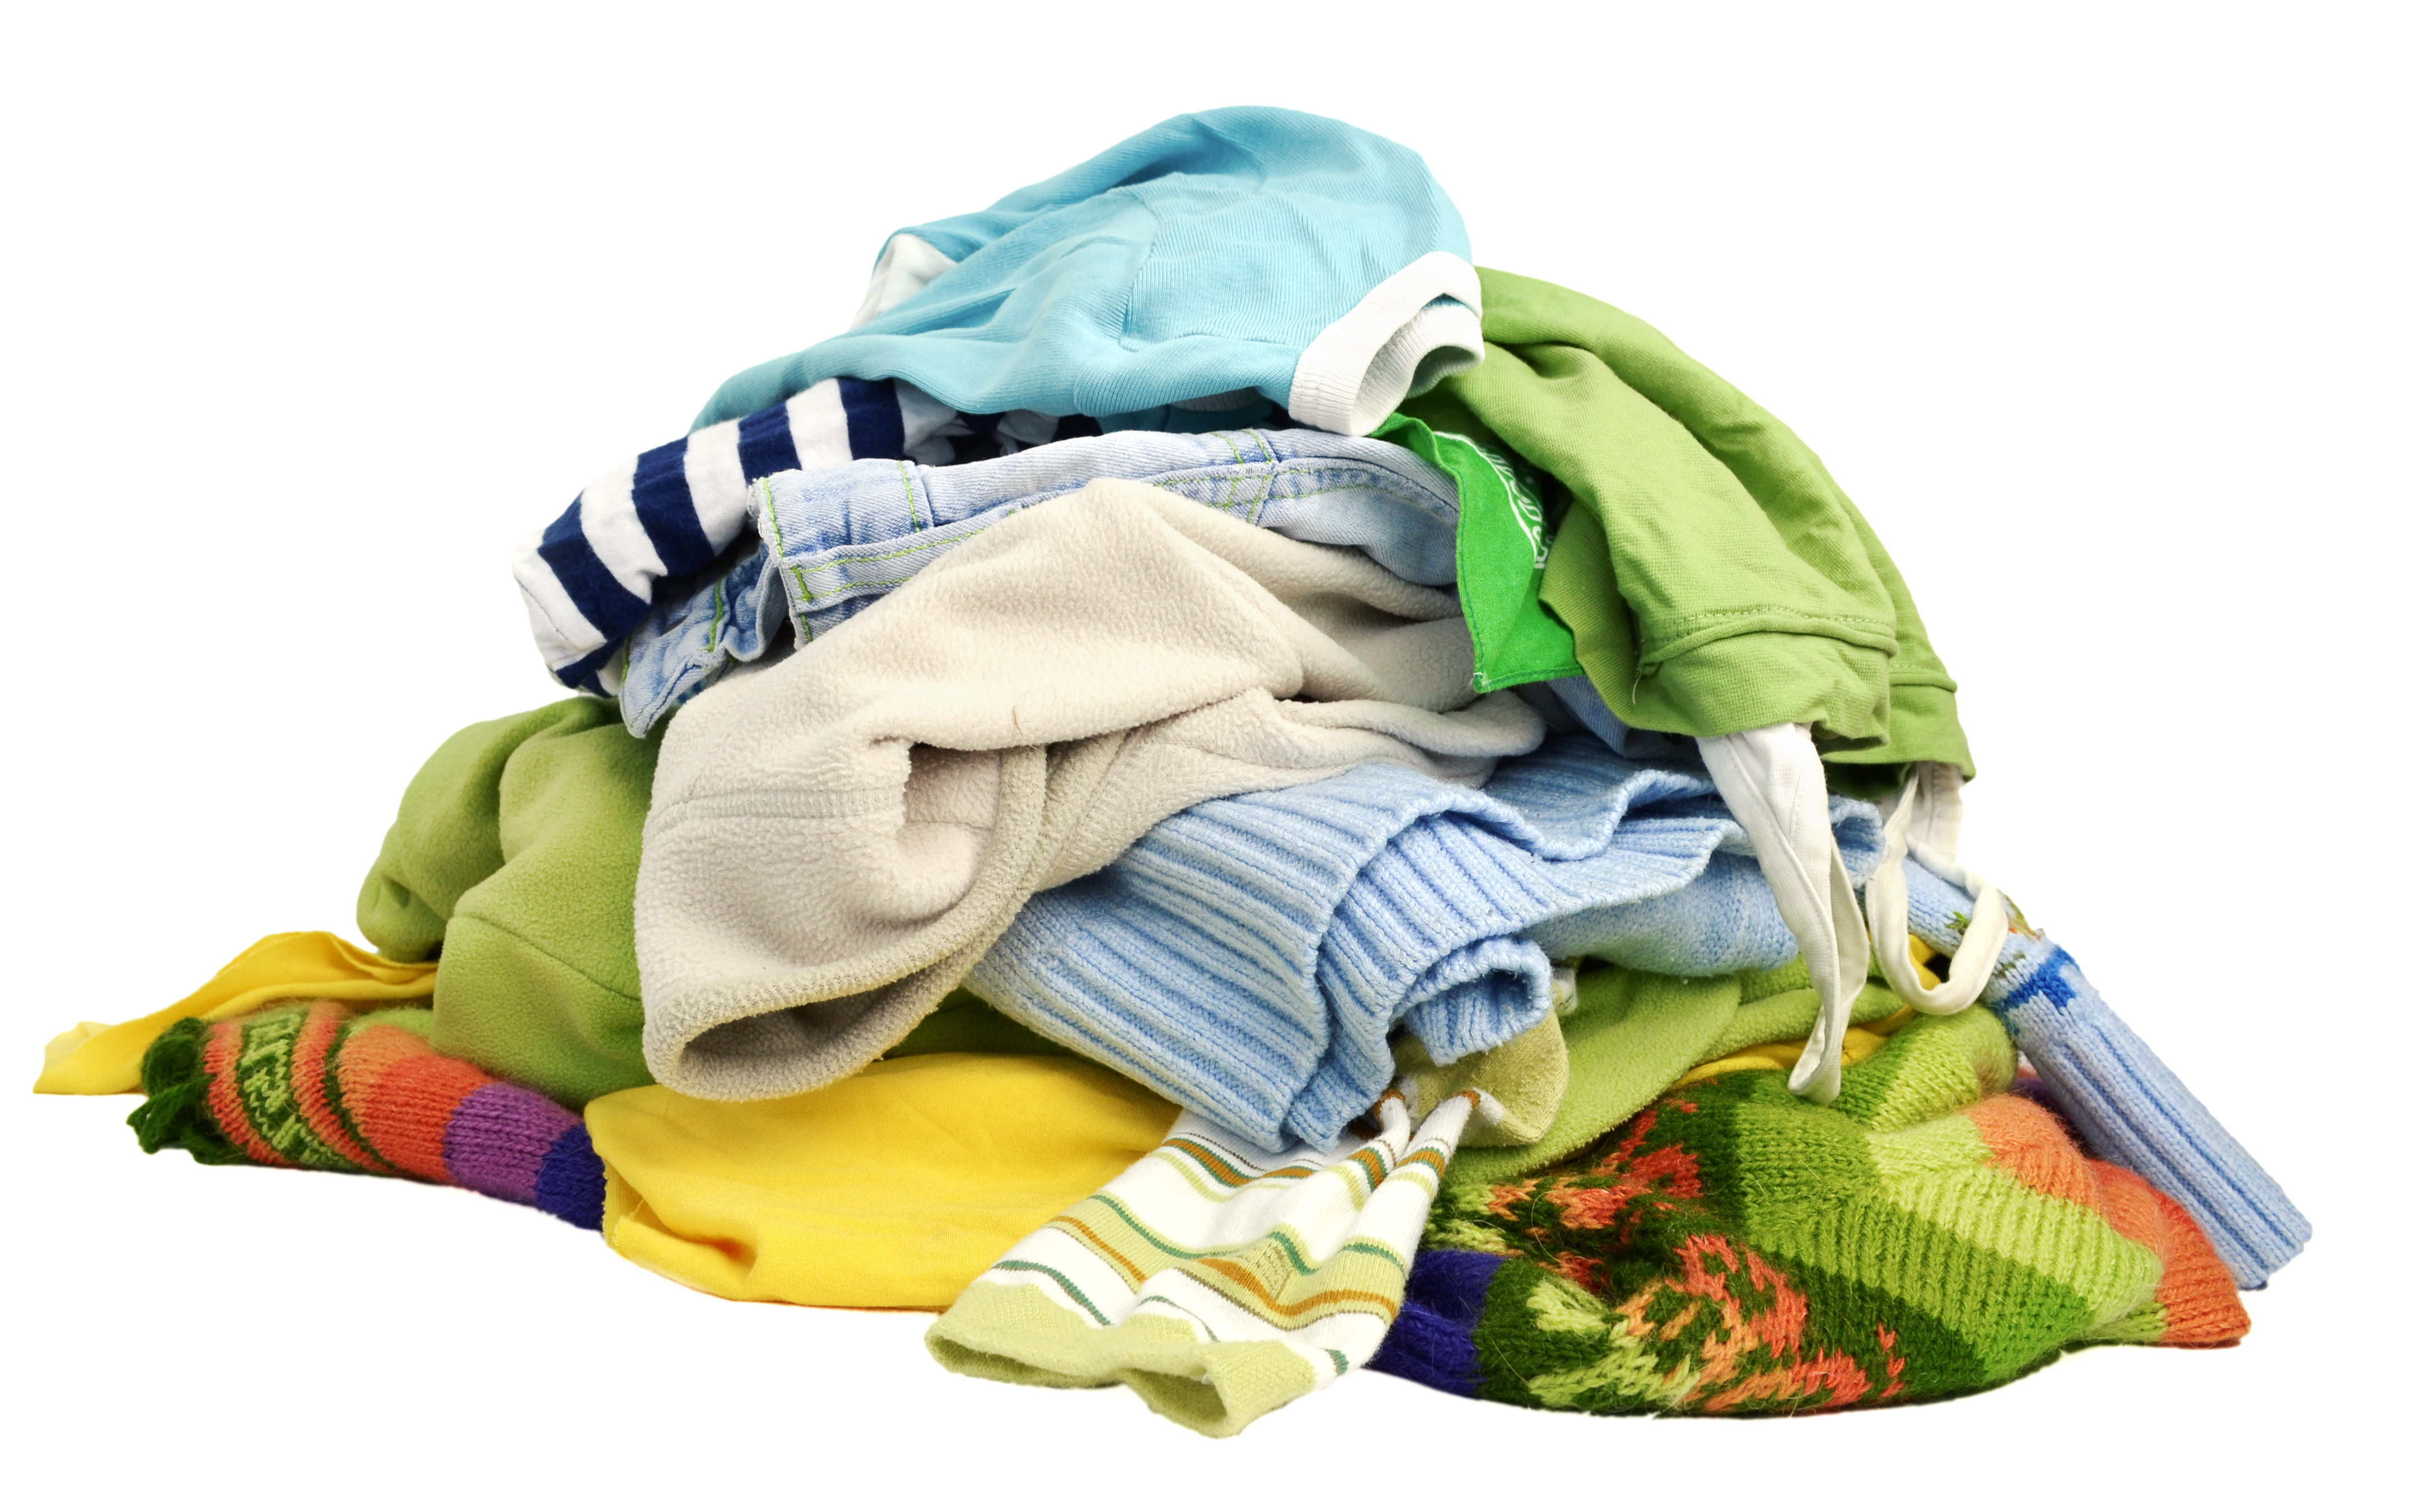 A pile of clothes on the floor | Source: Shutterstock